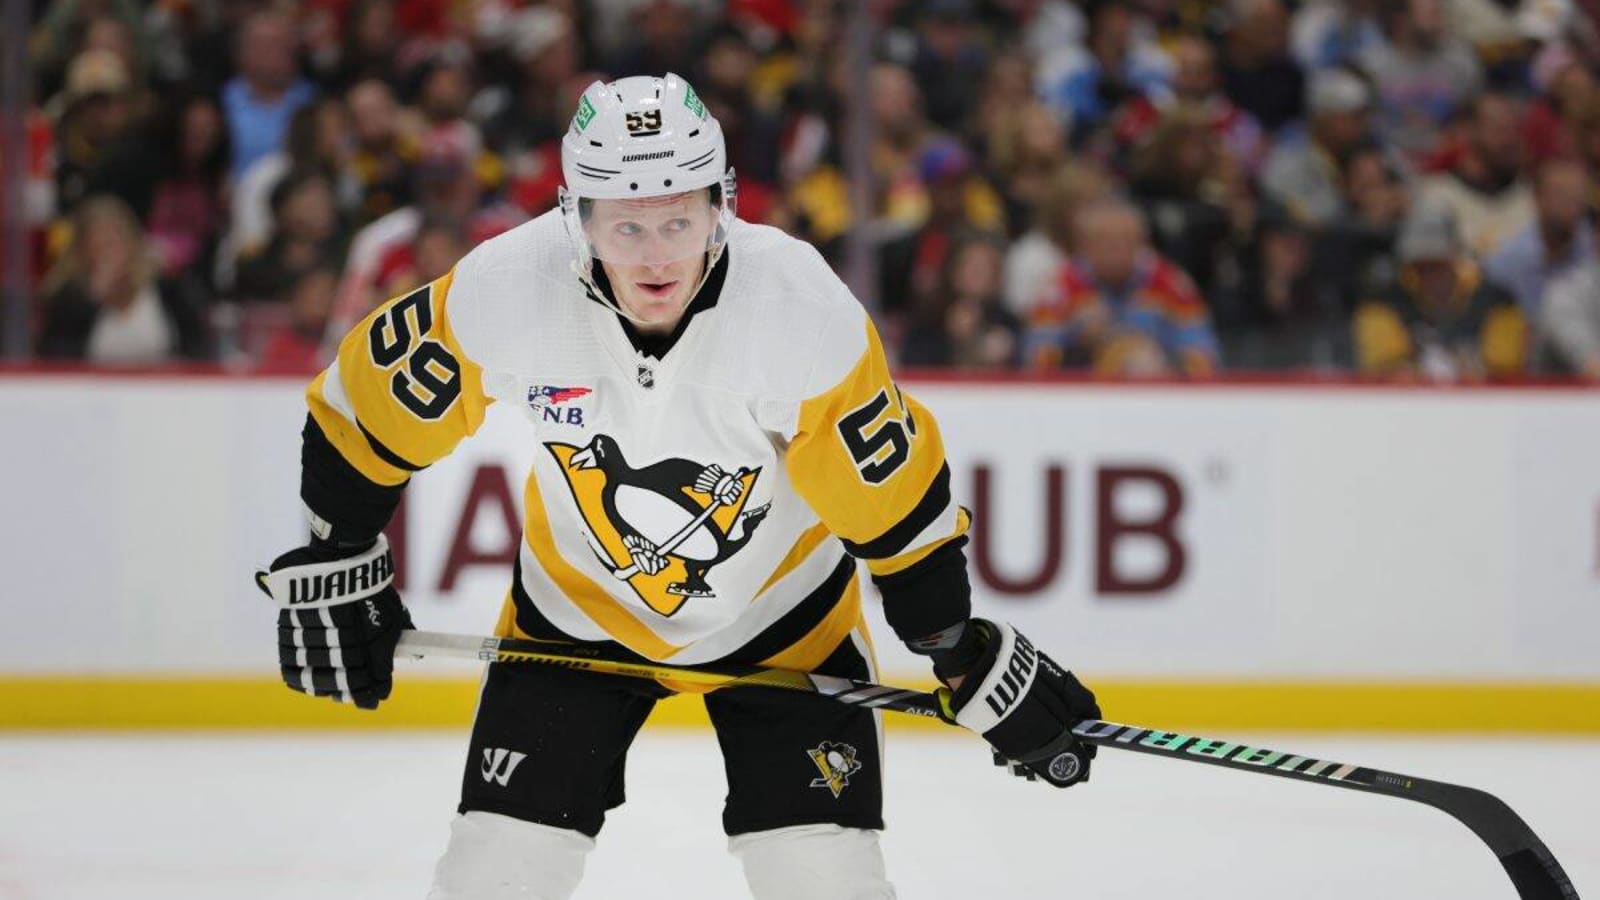 Five trade destinations to watch for Pittsburgh Penguins’ Jake Guentzel